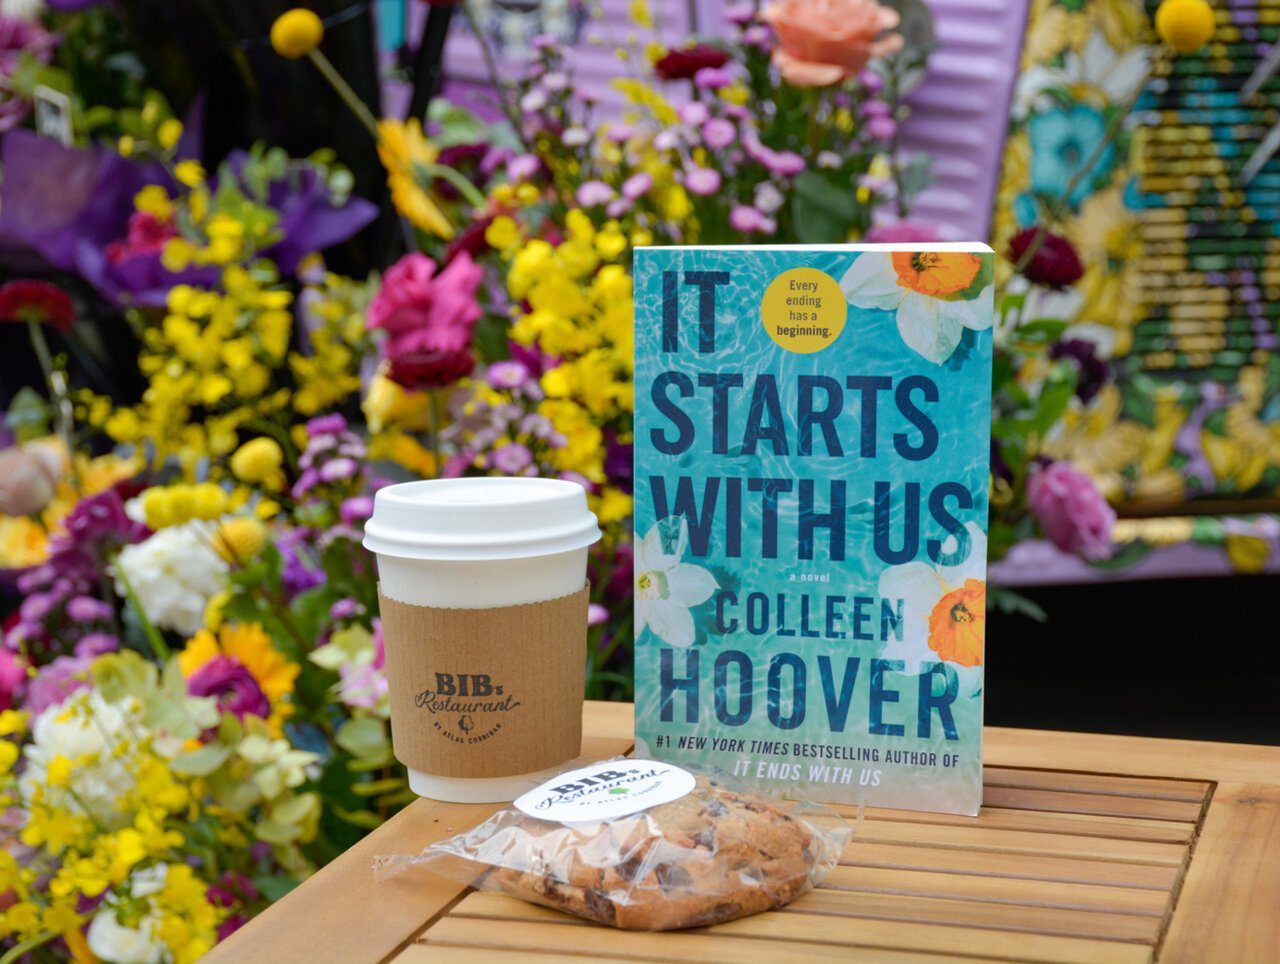 Colleen Hoover "It Starts With Us" pop up